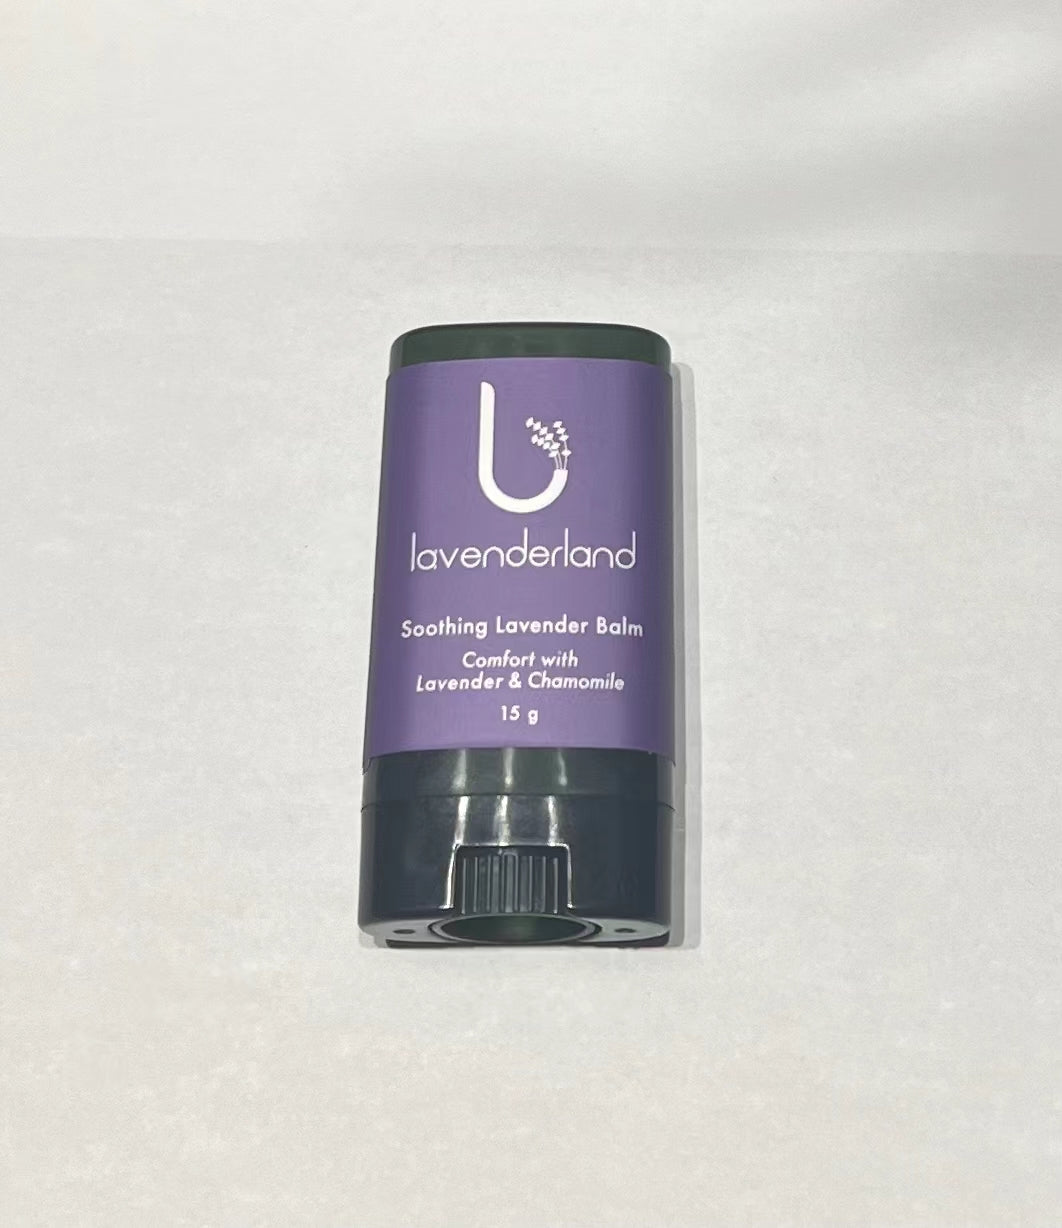 Soothing Lavender Balm